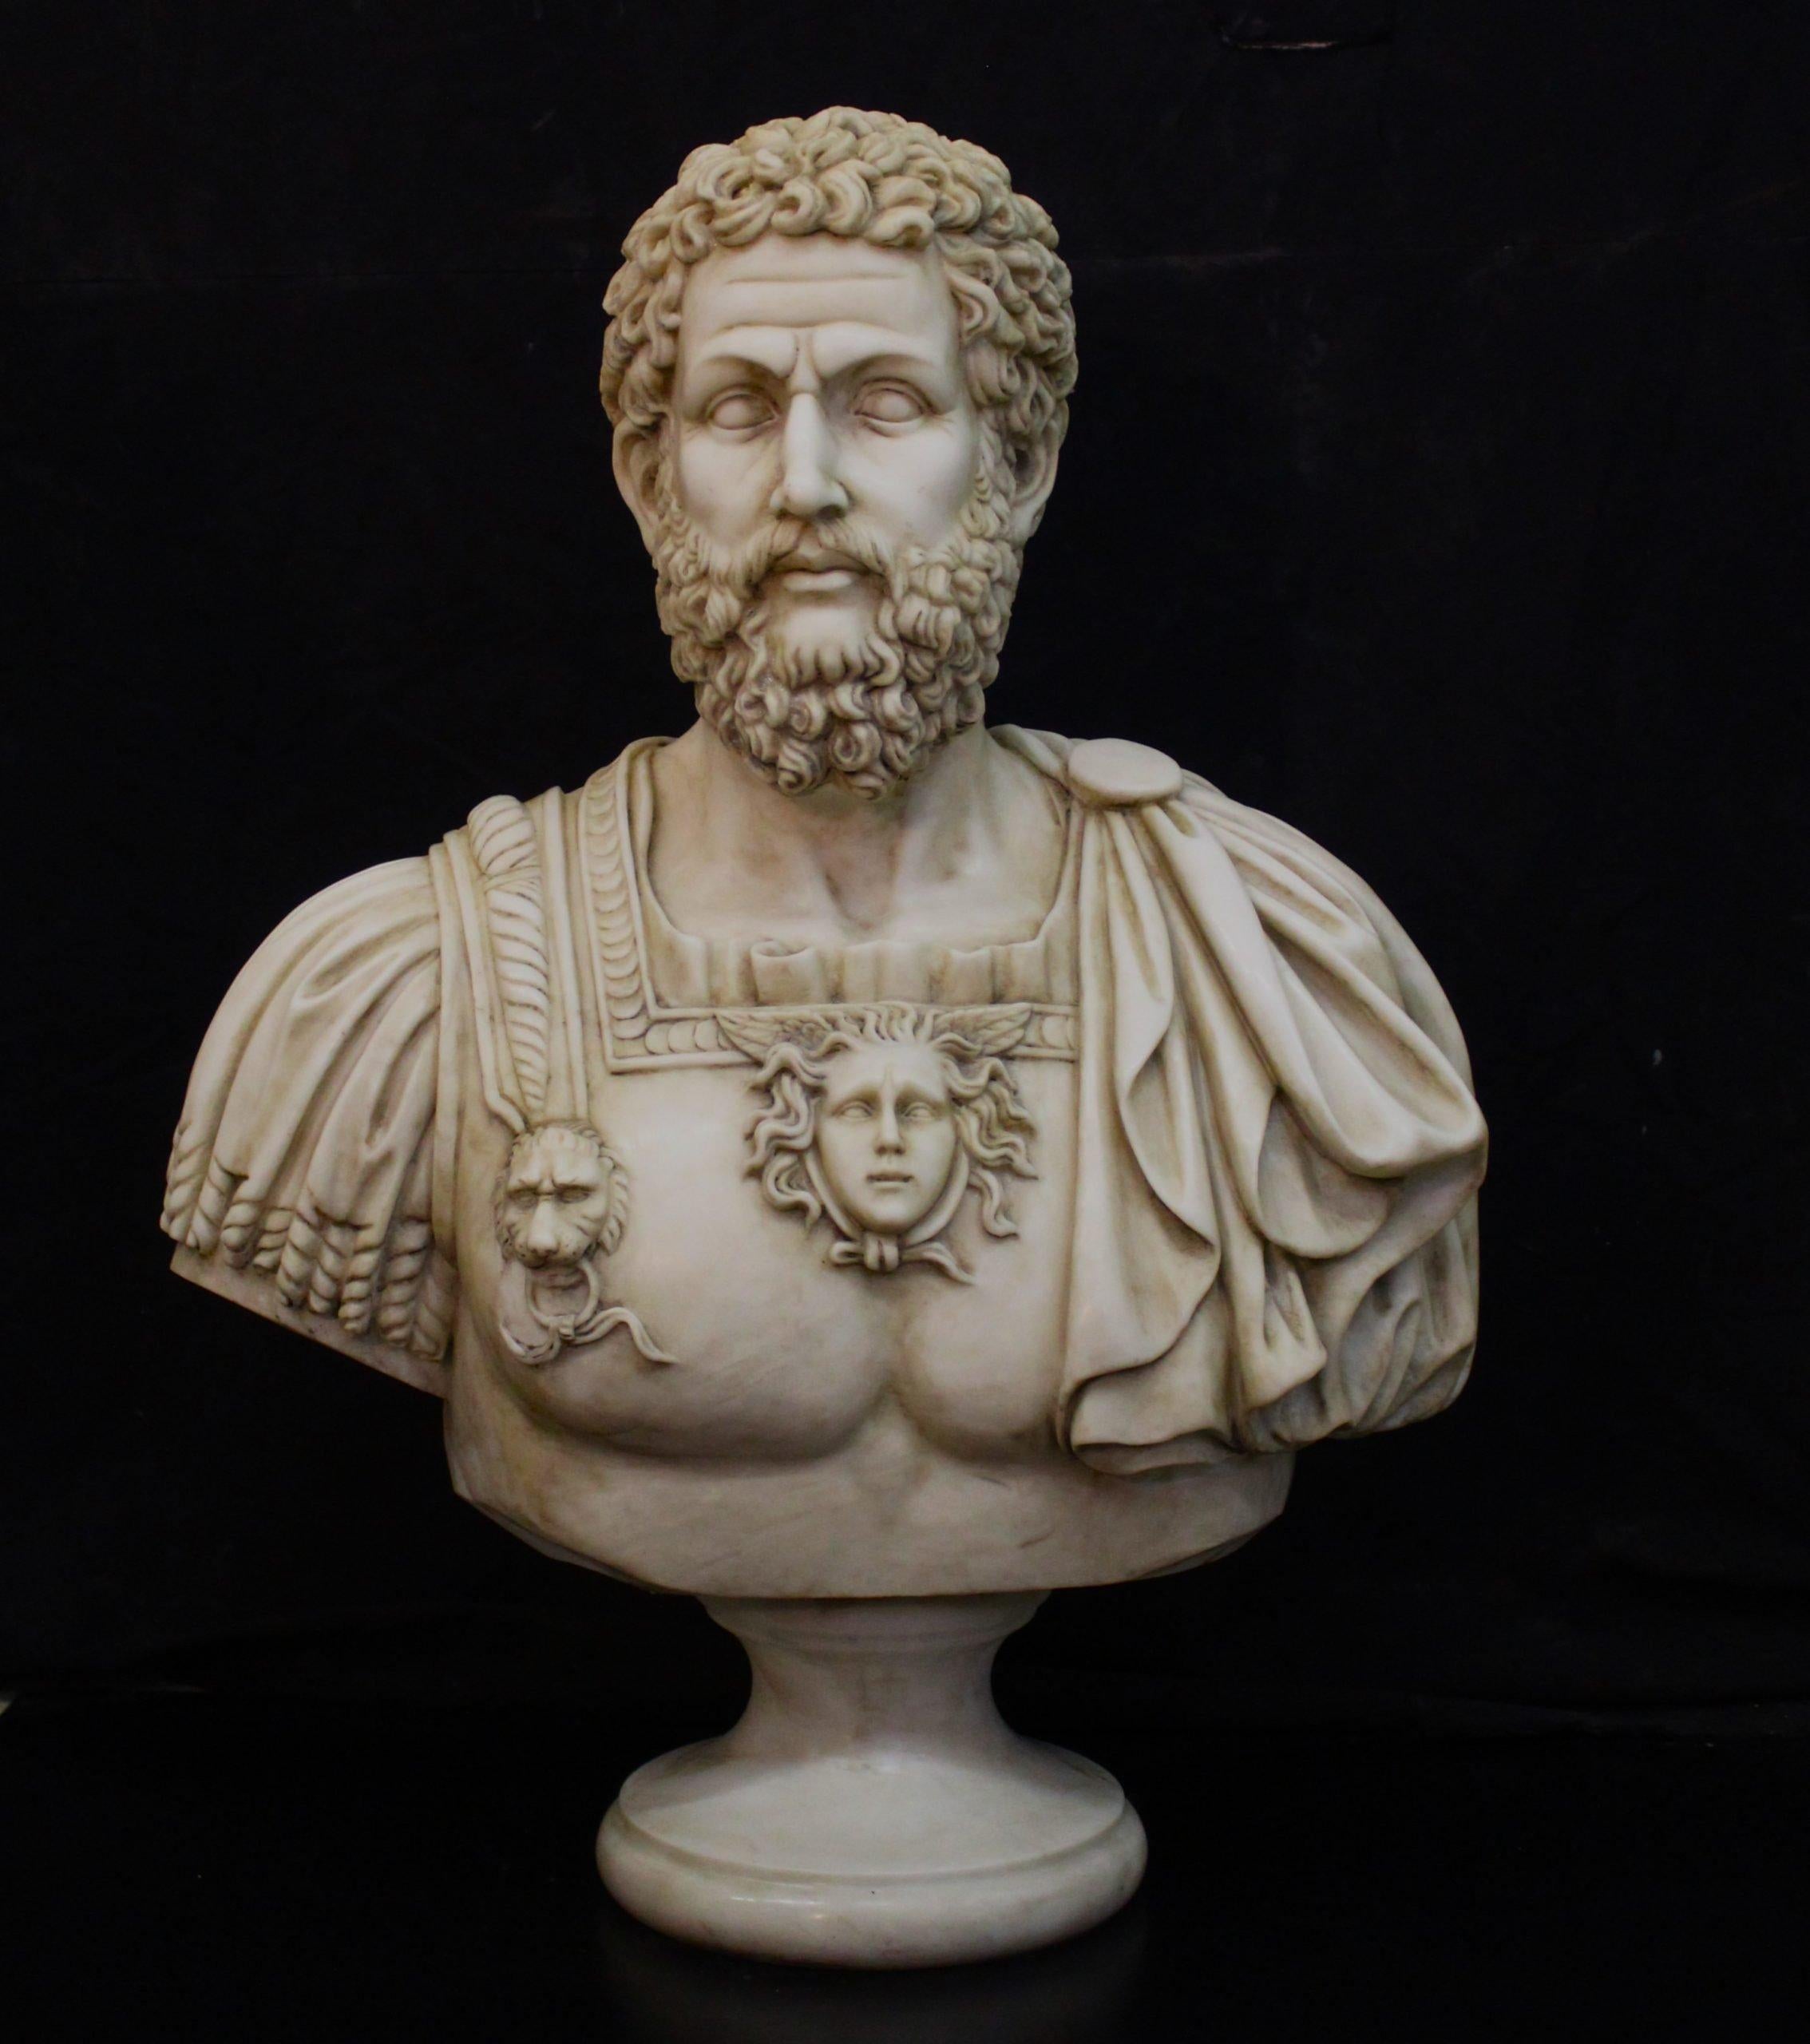 Bust of emperor, Antoninus Pius, in white marble, ADDITIONAL PHOTOS, INFORMATION OF THE LOT AND QUOTE FOR SHIPPING COST CAN BE REQUEST BY SENDING AN EMAIL